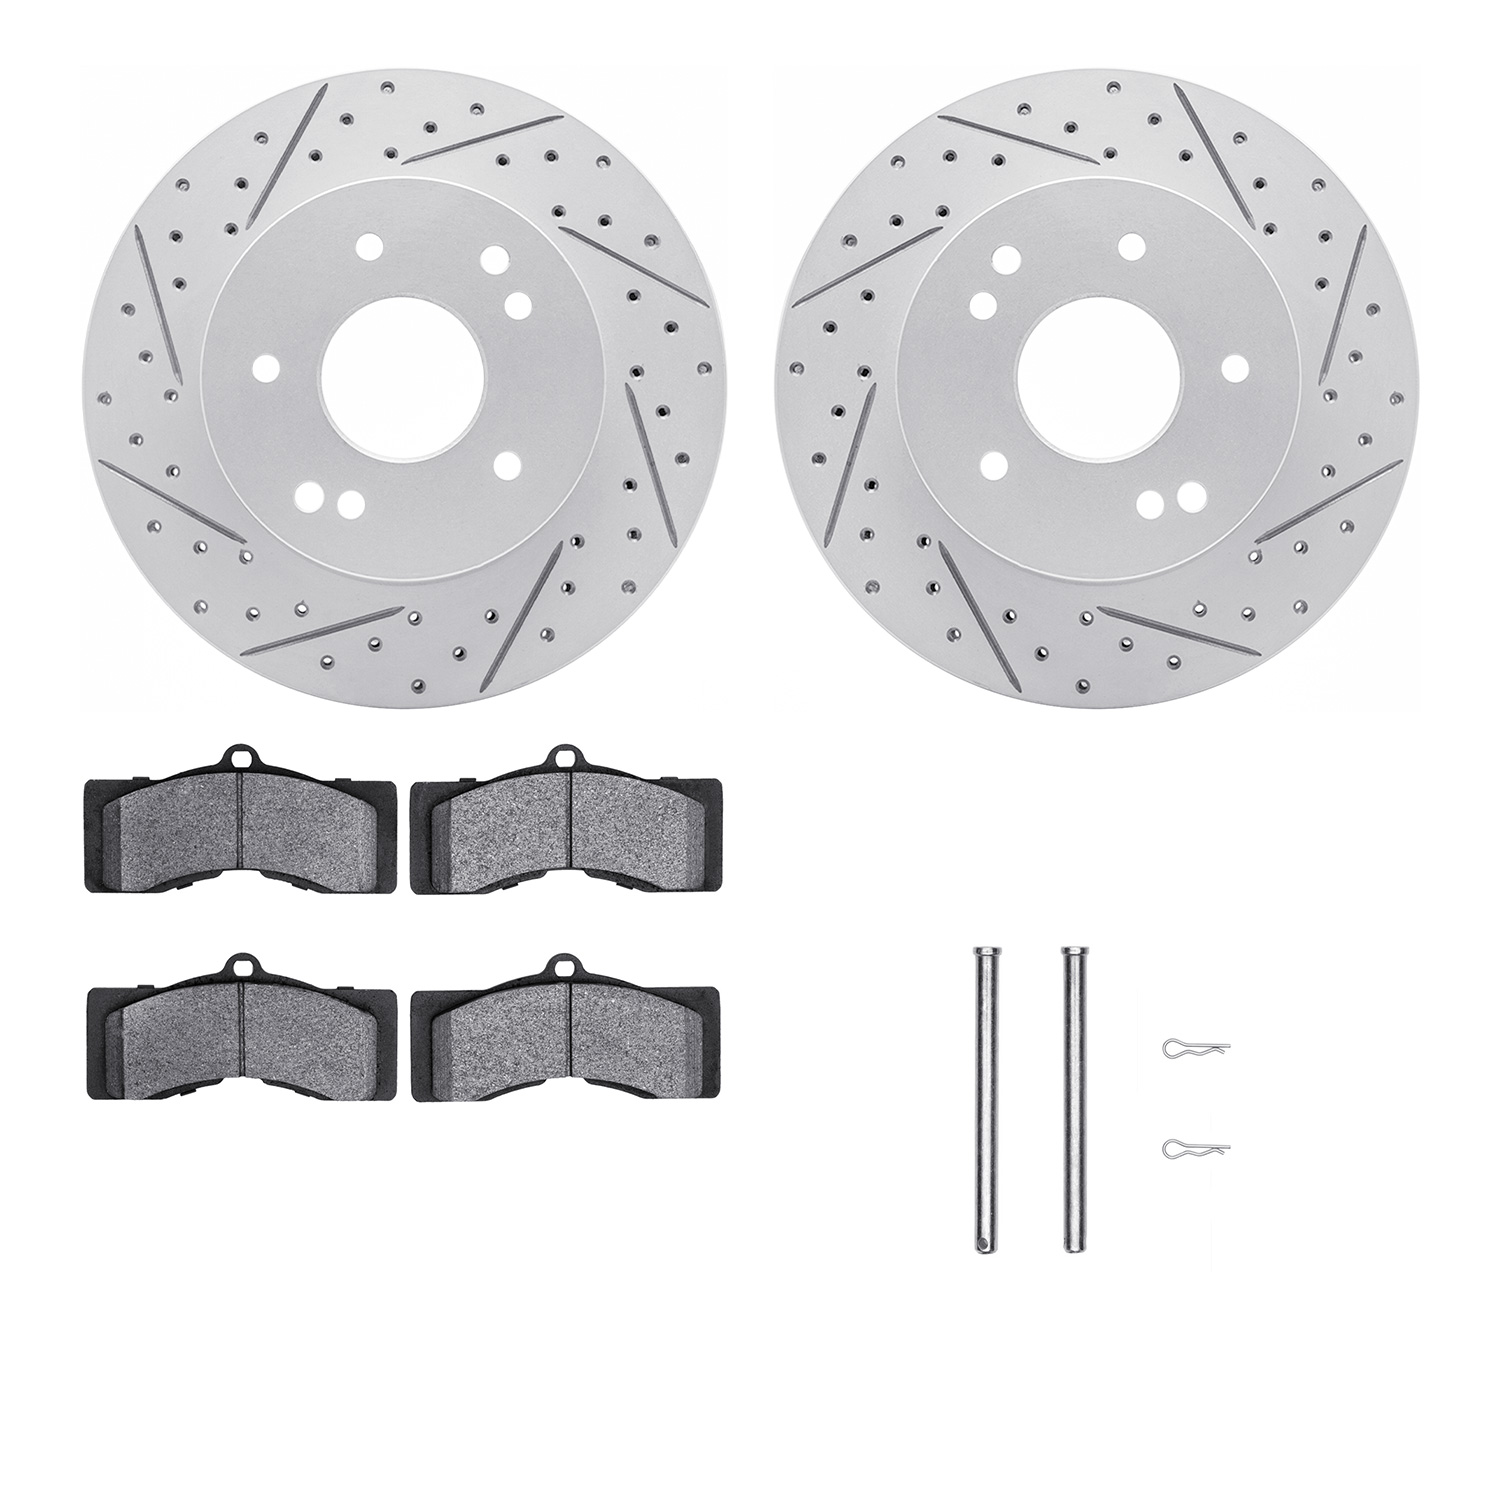 2212-47004 Geoperformance Drilled/Slotted Rotors w/Heavy-Duty Pads Kit & Hardware, 1963-1982 GM, Position: Rear, Front